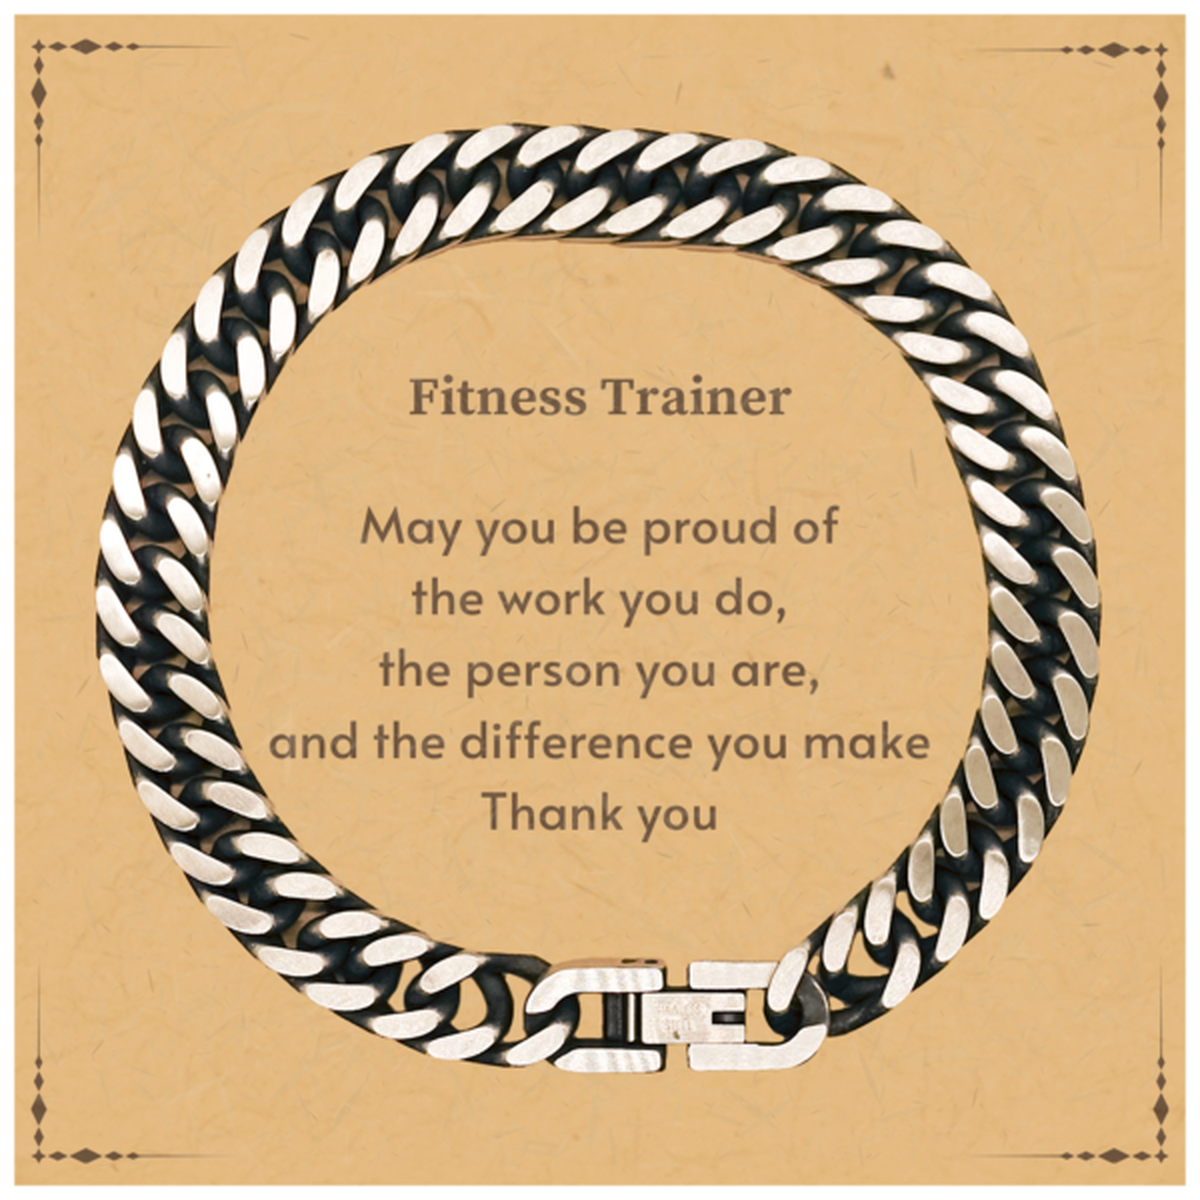 Heartwarming Cuban Link Chain Bracelet Retirement Coworkers Gifts for Fitness Trainer, Fitness Trainer May You be proud of the work you do, the person you are Gifts for Boss Men Women Friends